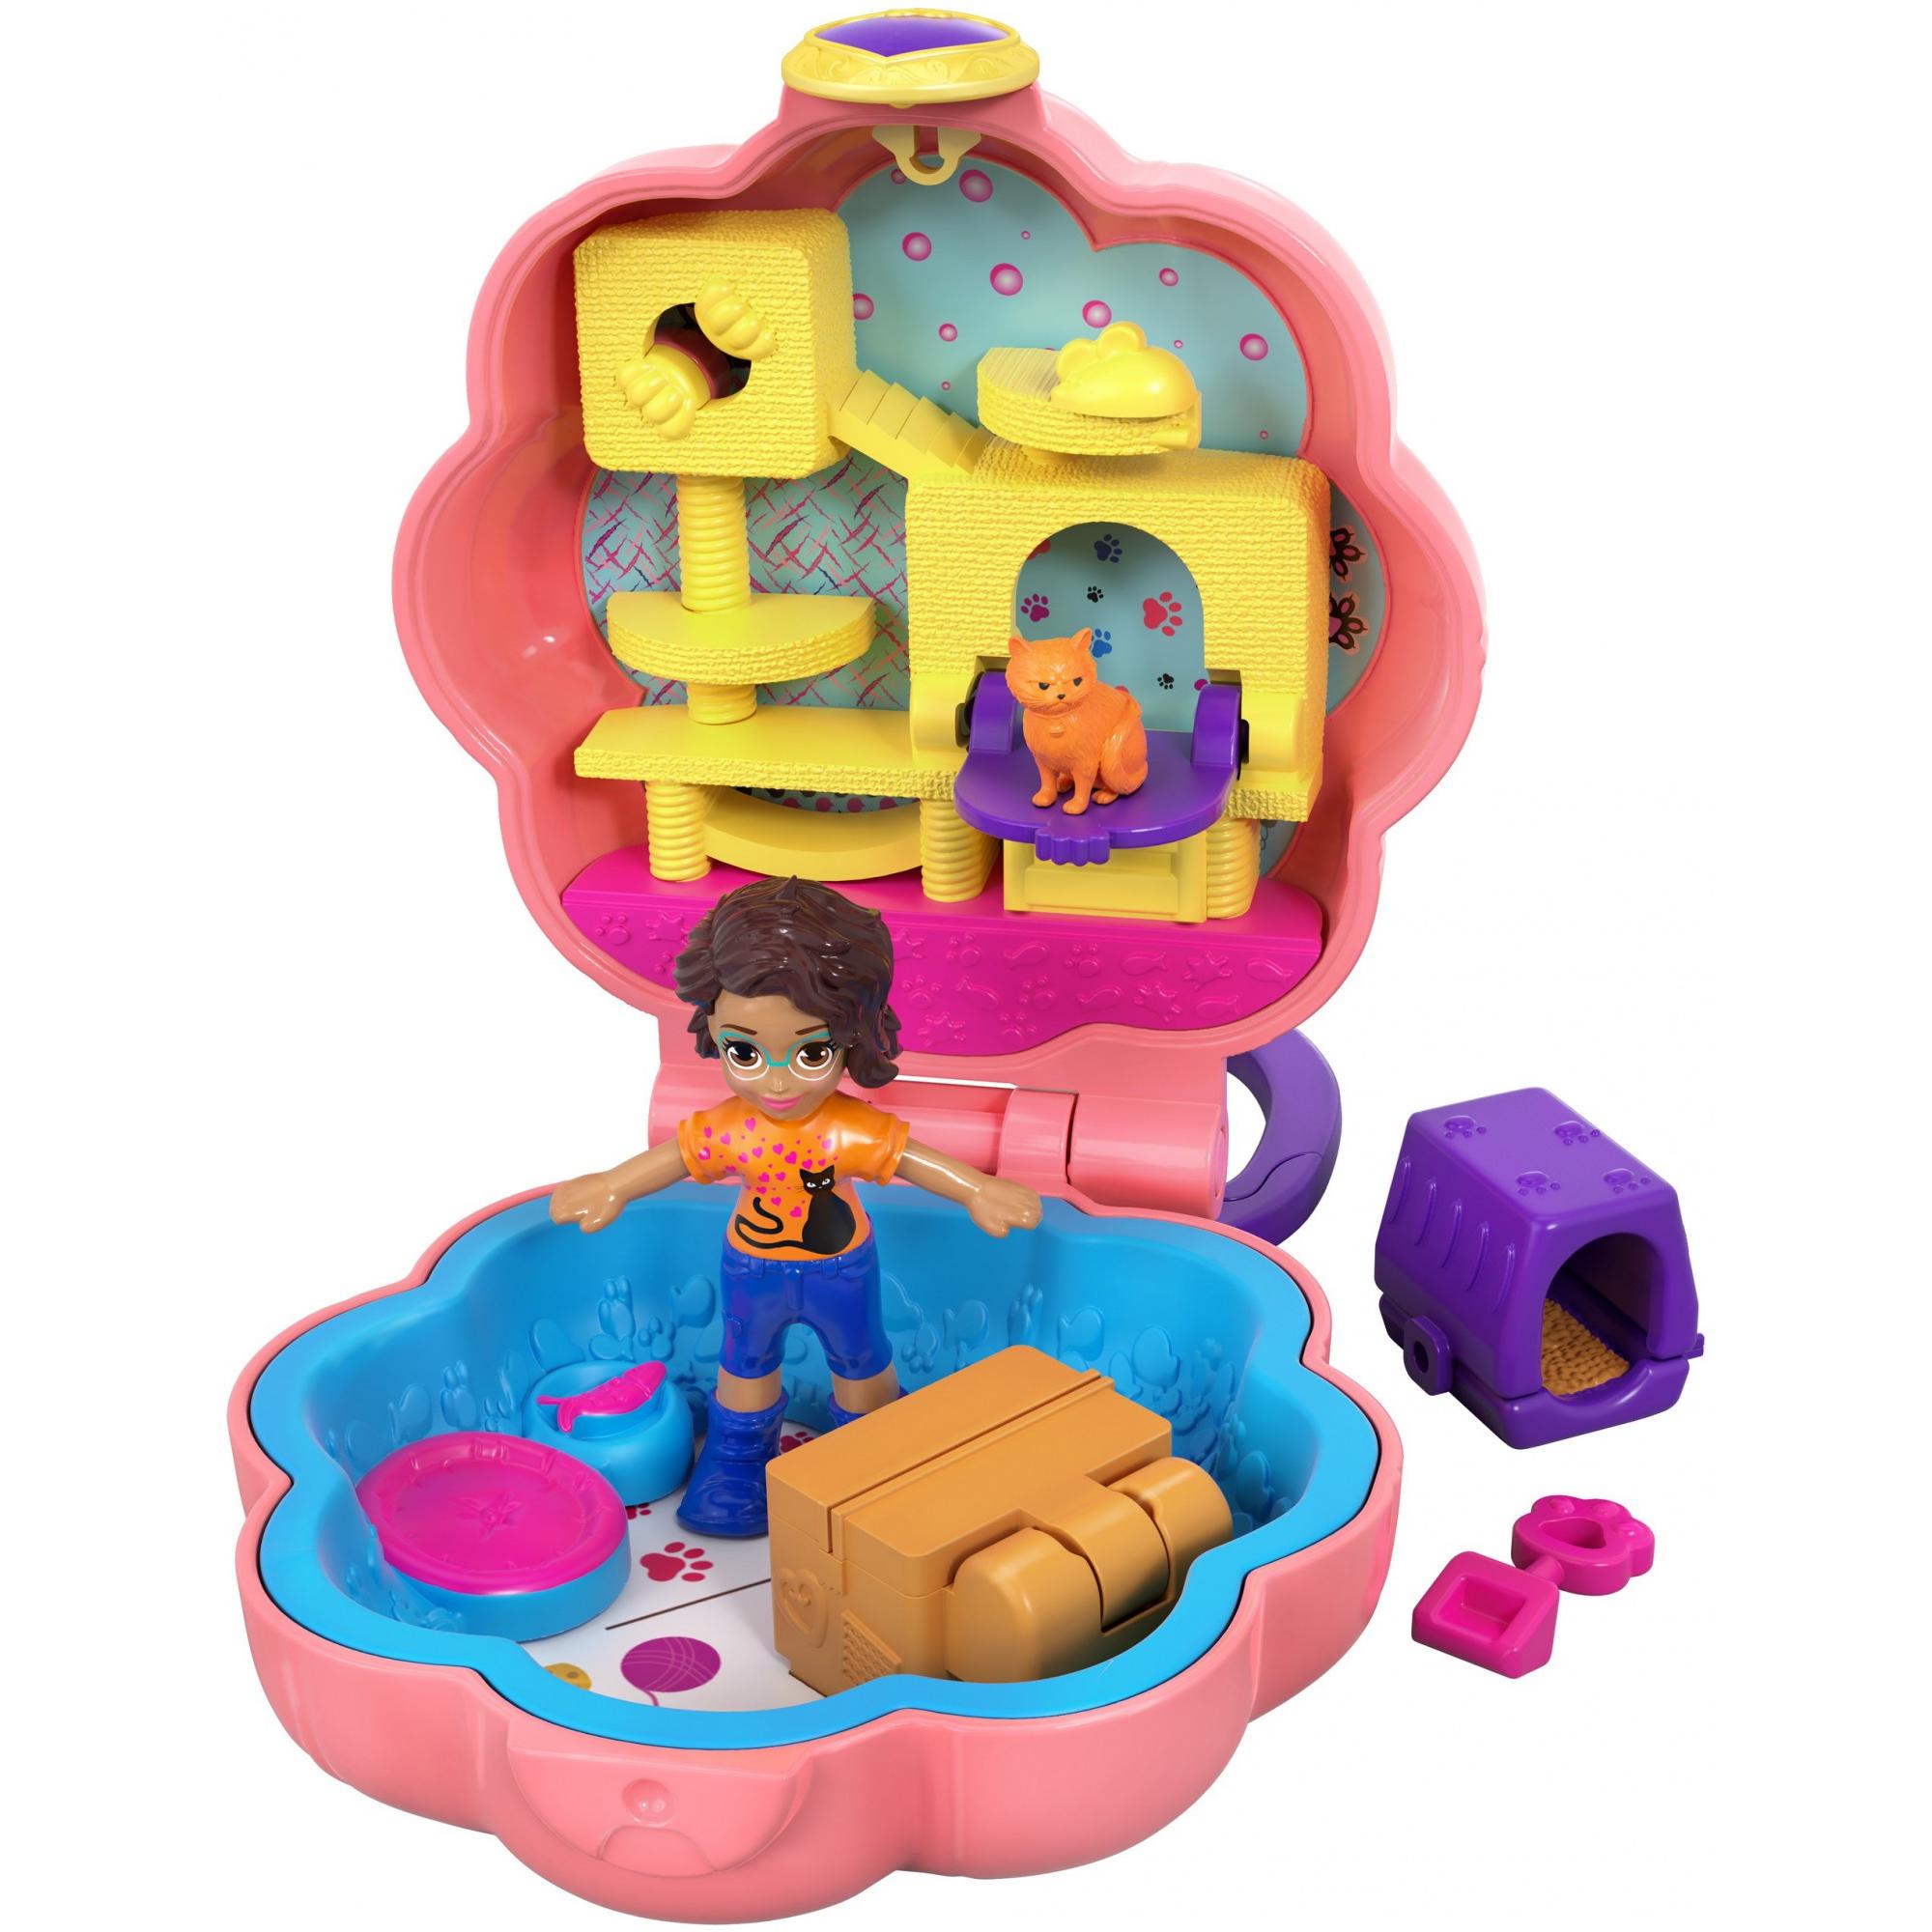 Polly Pocket Purrfect Playhouse - image 1 of 6